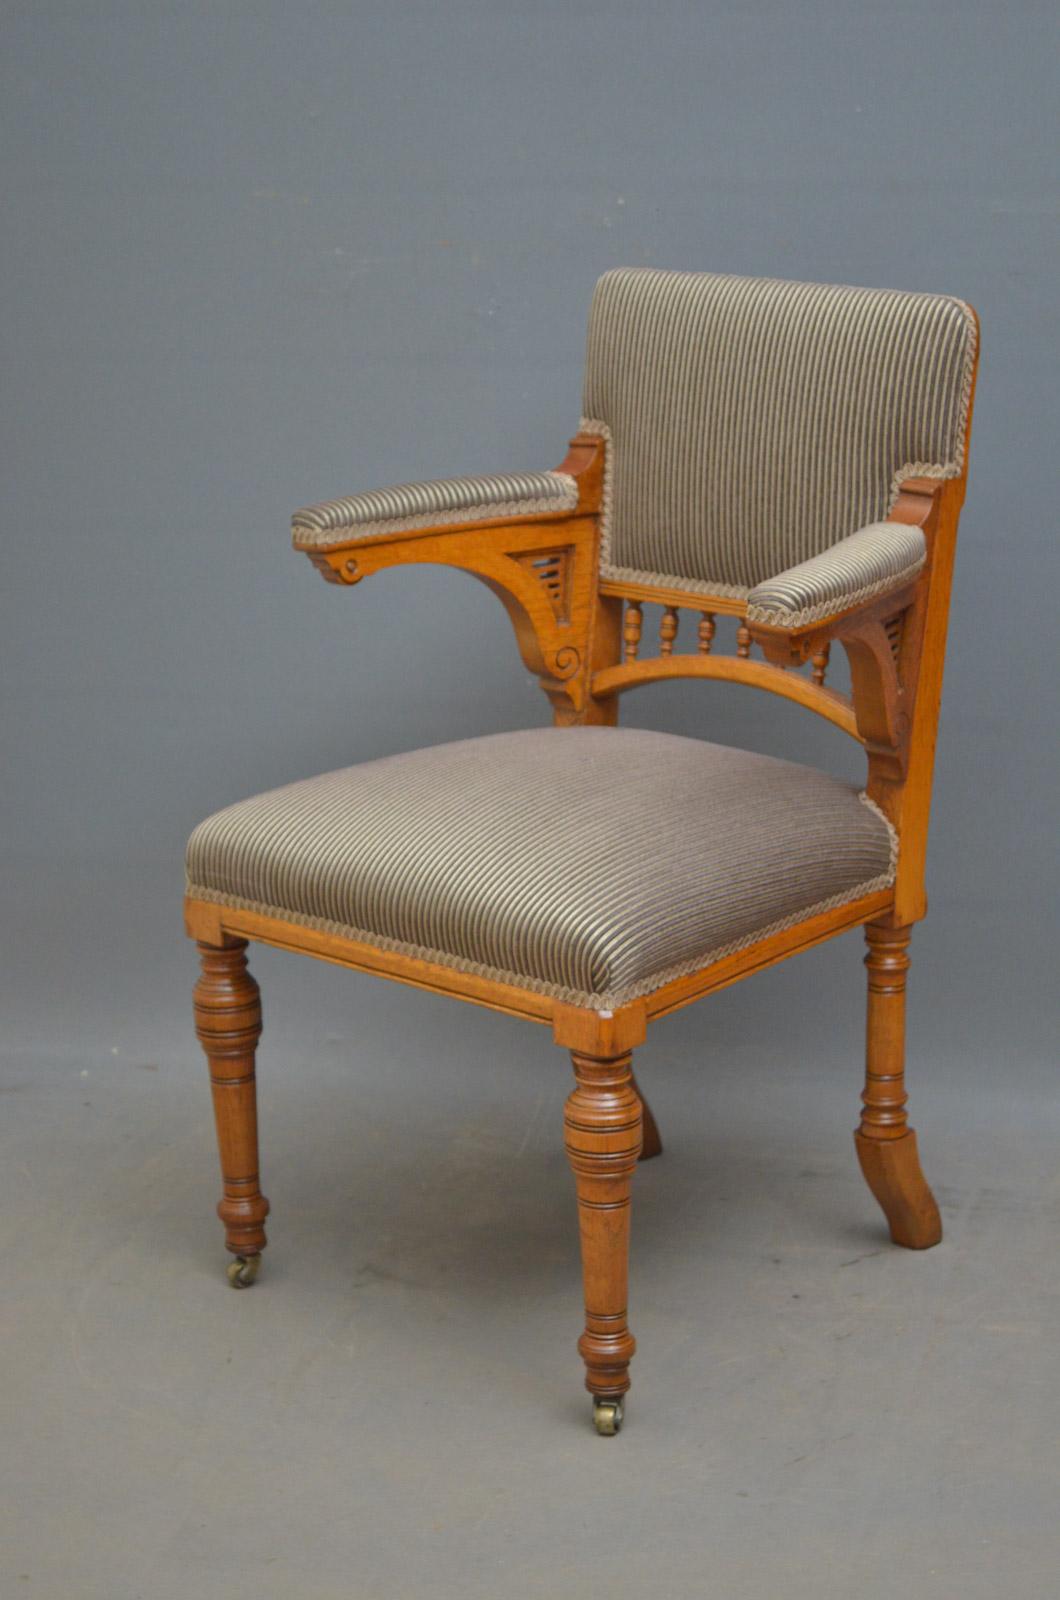 Sn4424 Victorian - Aesthetic Movement office chair in oak, having upholstered back with turned spindles below, open padded arms and generous, sprung seat, standing on turned legs and brass castors. This antique chair is in excellent home ready